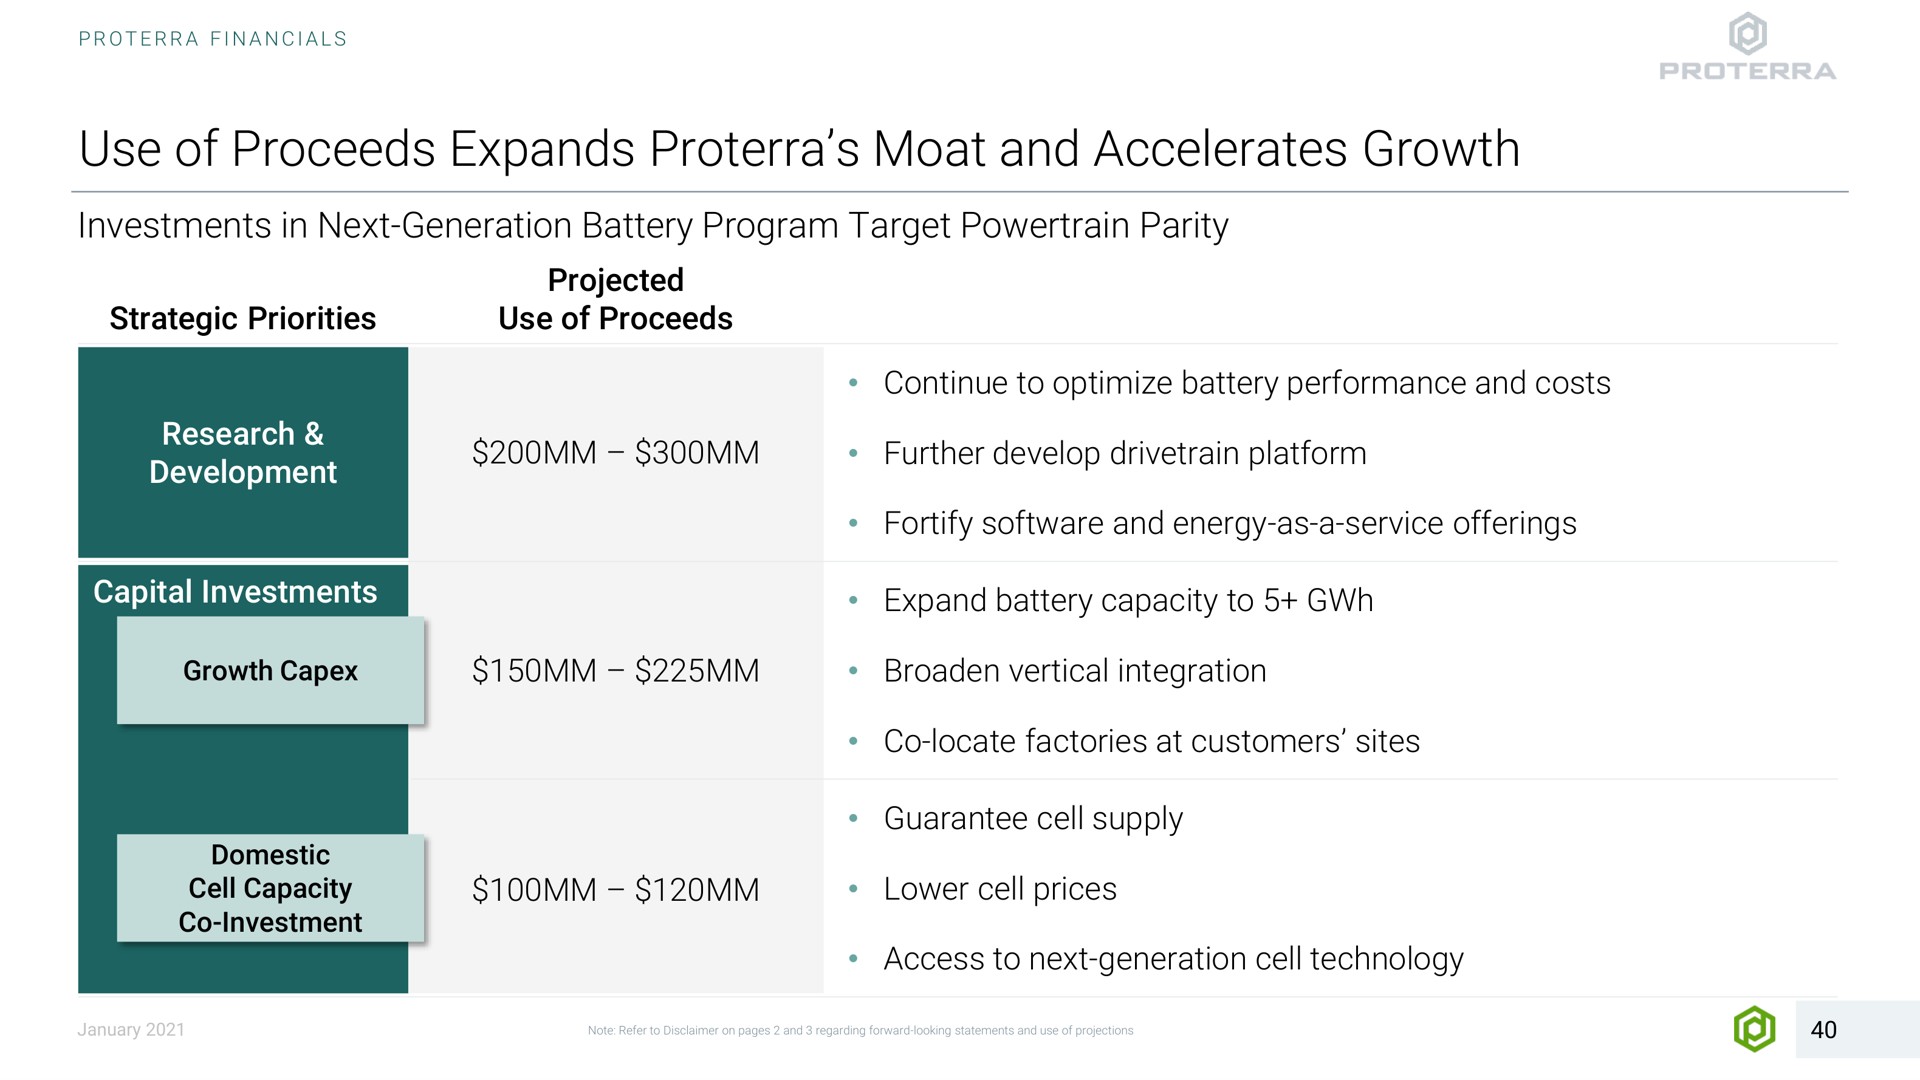 use of proceeds expands moat and accelerates growth investments in next generation battery program target parity strategic priorities projected research development further develop platform fortify energy as a service offerings continue to optimize battery performance costs capital investments expand battery capacity to broaden vertical integration locate factories at customers sites guarantee cell supply domestic cell capacity investment lower cell prices access to next generation cell technology | Proterra